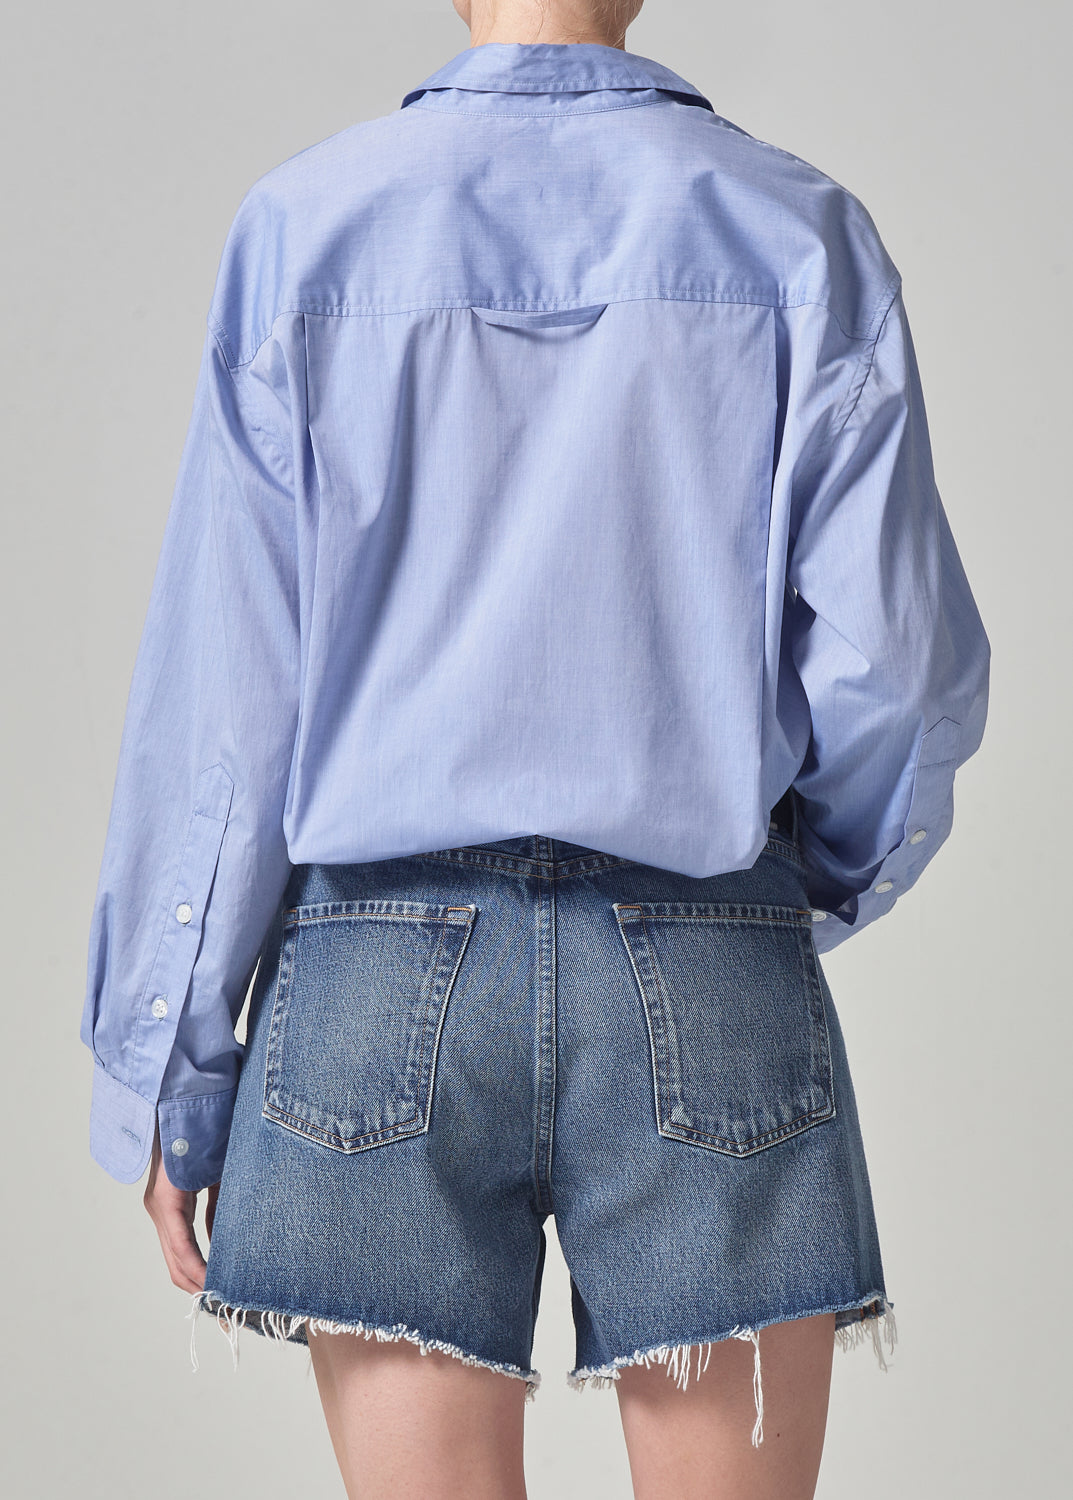 Citizens of Hummanity Kayla button up shirt blue skyway stripe | Pipe and Row